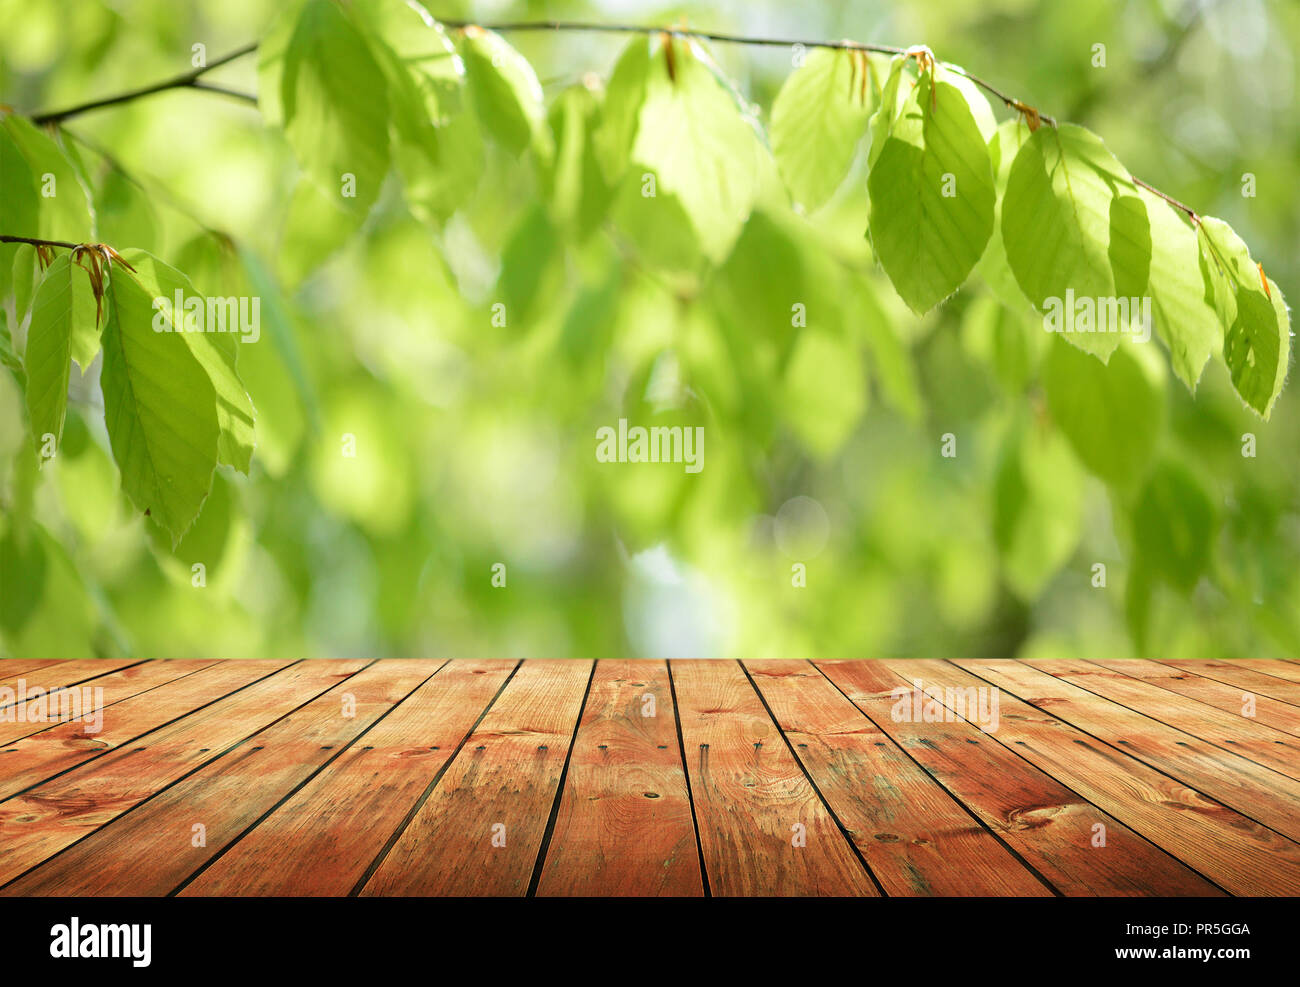 Wooden table background Stock Photo - Alamy